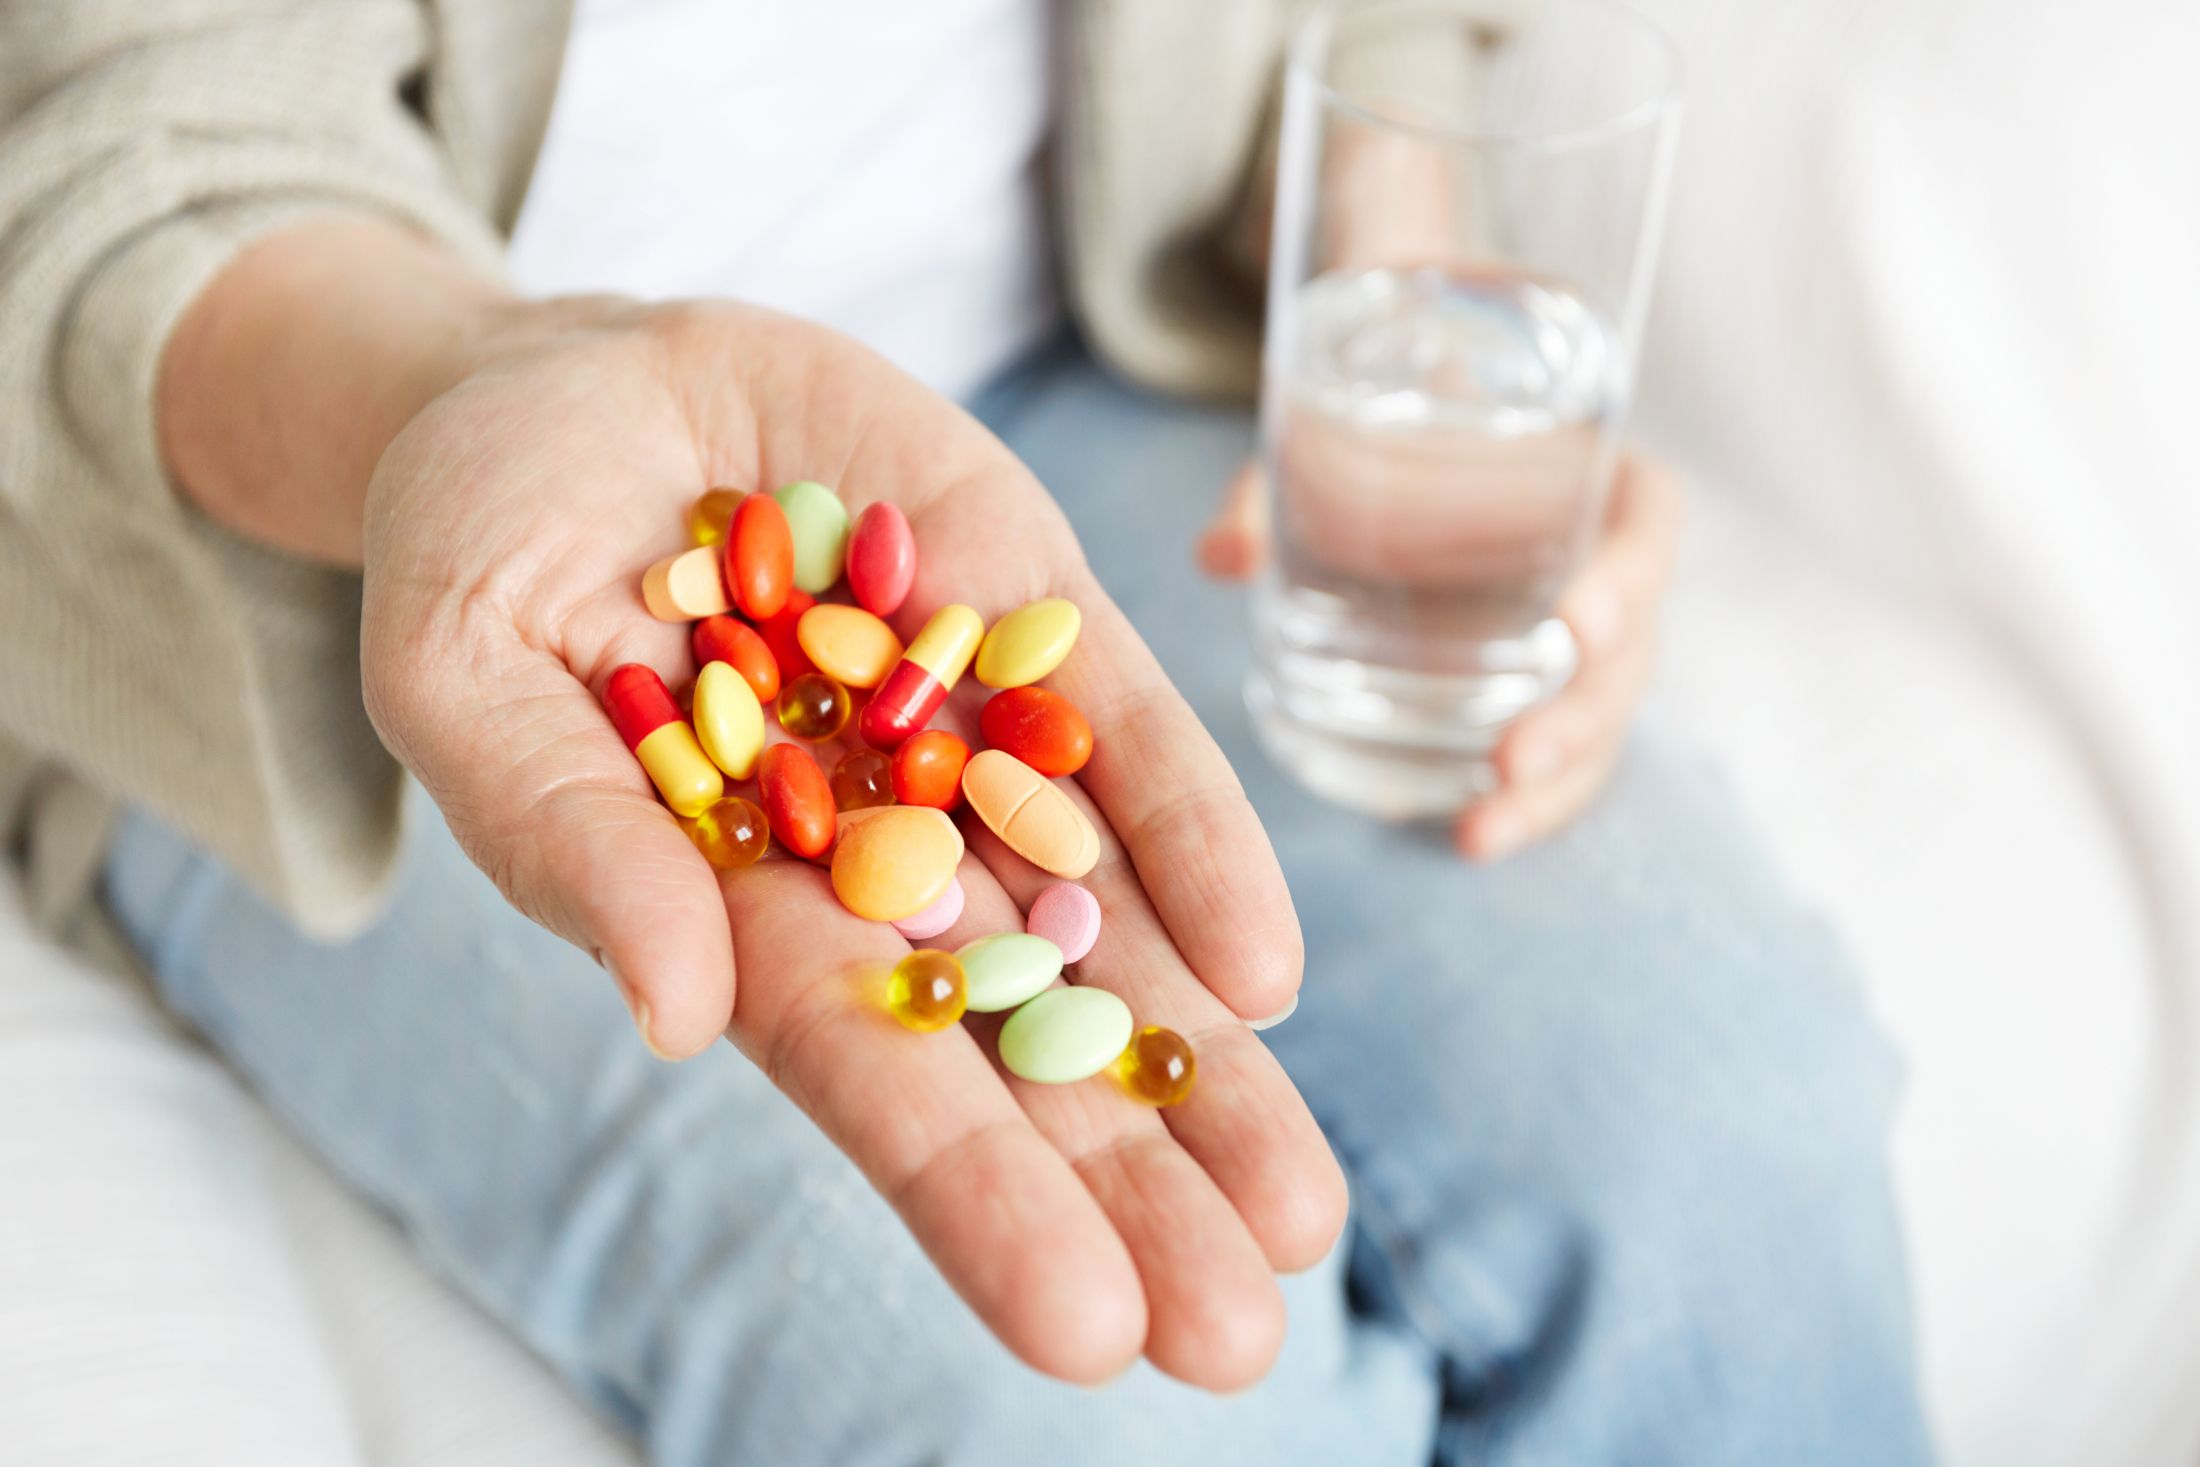 pills-tablets-vitamins-and-drugs-heap-in-mature-hands.jpg